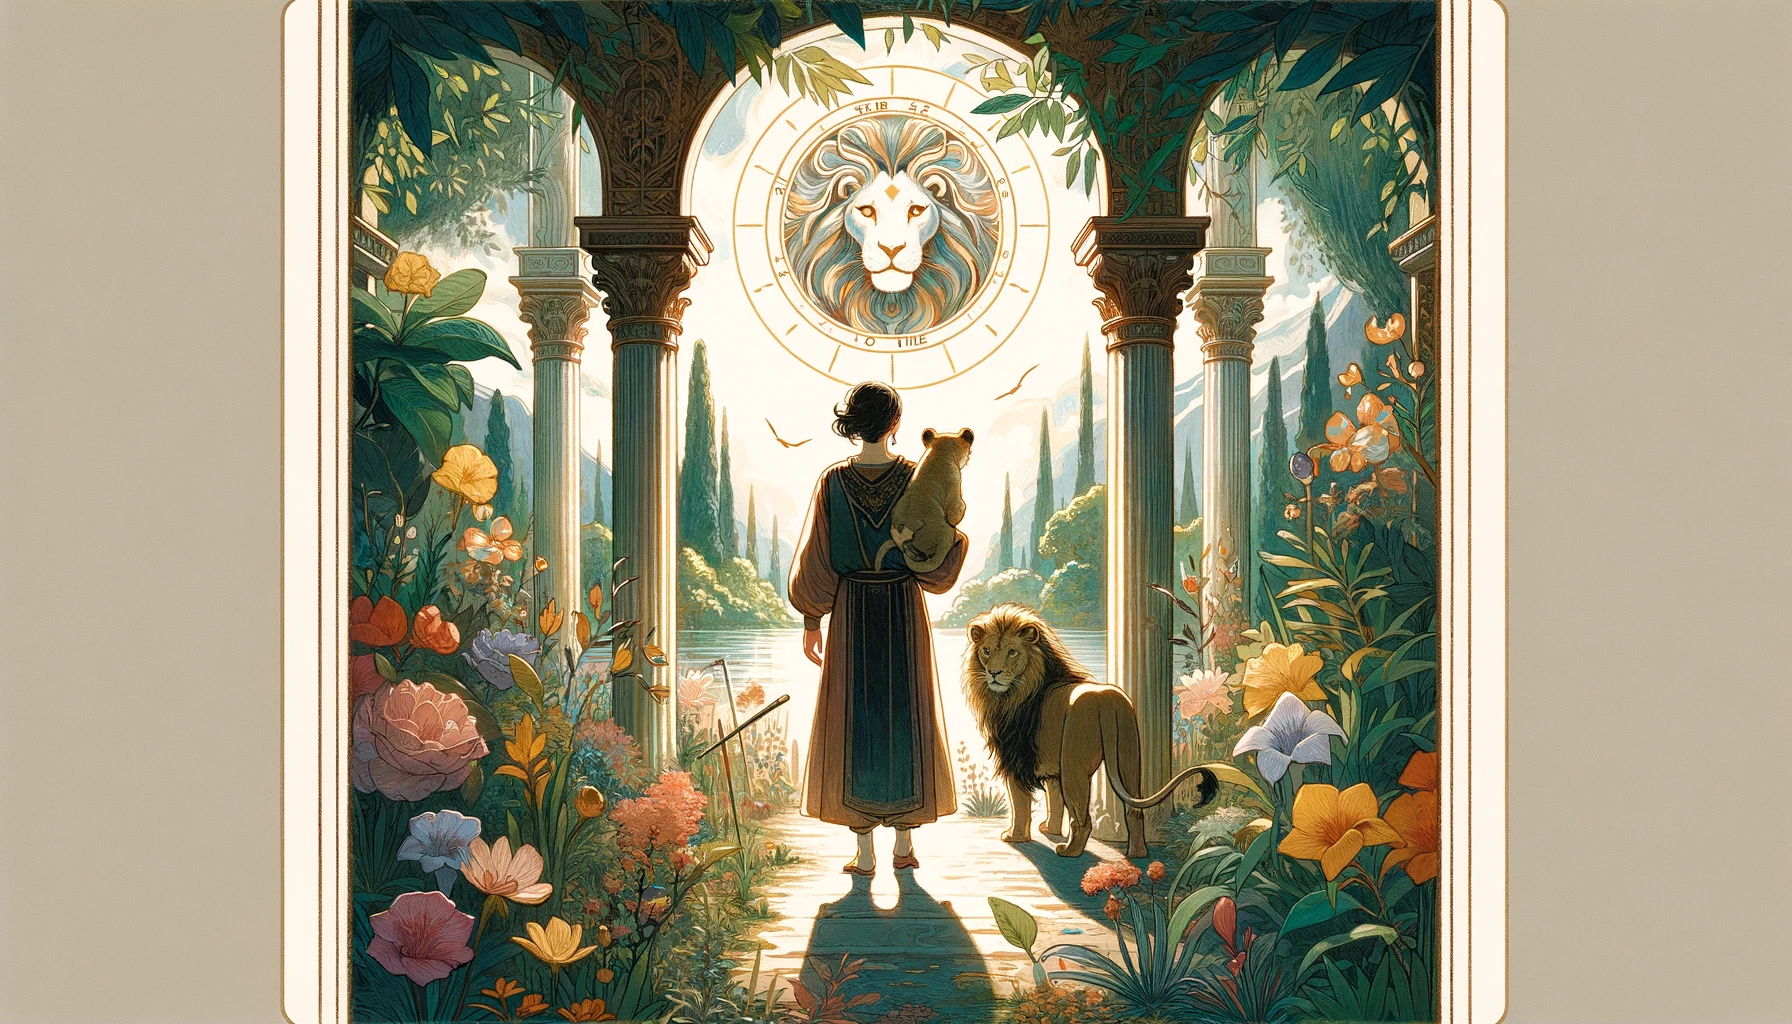 "In this visualization, a figure stands in a tranquil garden, gently holding a small lion, symbolizing the balance between courage and compassion, and the mastery of one's fears. The lush and vibrant garden represents the growth and harmony that result from inner strength, with a mood of calm and empowerment conveyed through a color palette of rich greens, warm golds, and soft blues, reflecting the peaceful yet powerful nature of the feelings evoked by the Strength card."